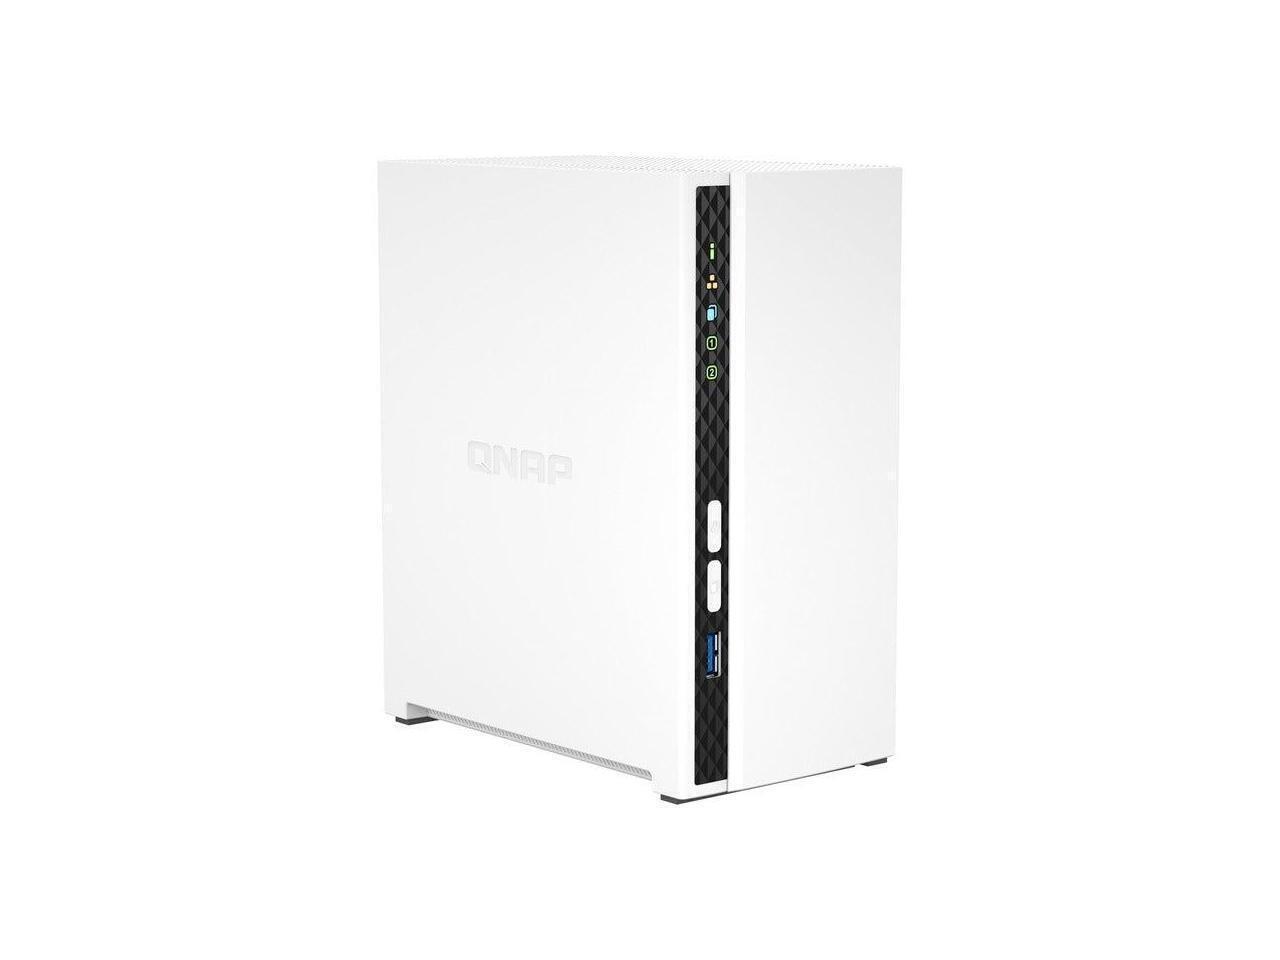 QNAP TS-233 Diskless System Network Storage NAS - New in Box